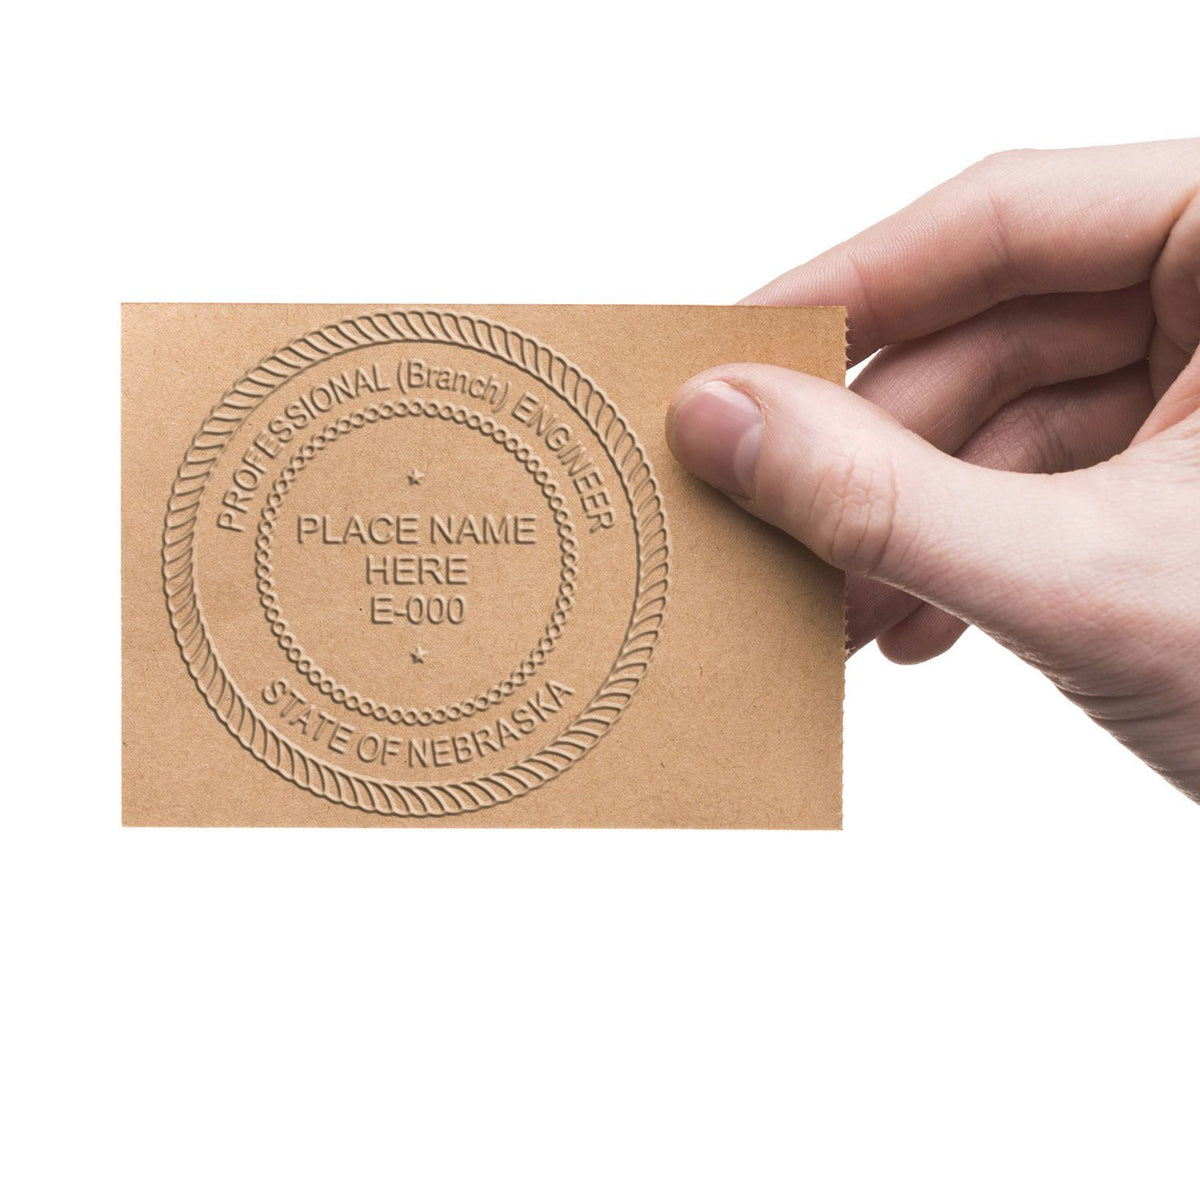 The Gift Nebraska Engineer Seal stamp impression comes to life with a crisp, detailed image stamped on paper - showcasing true professional quality.